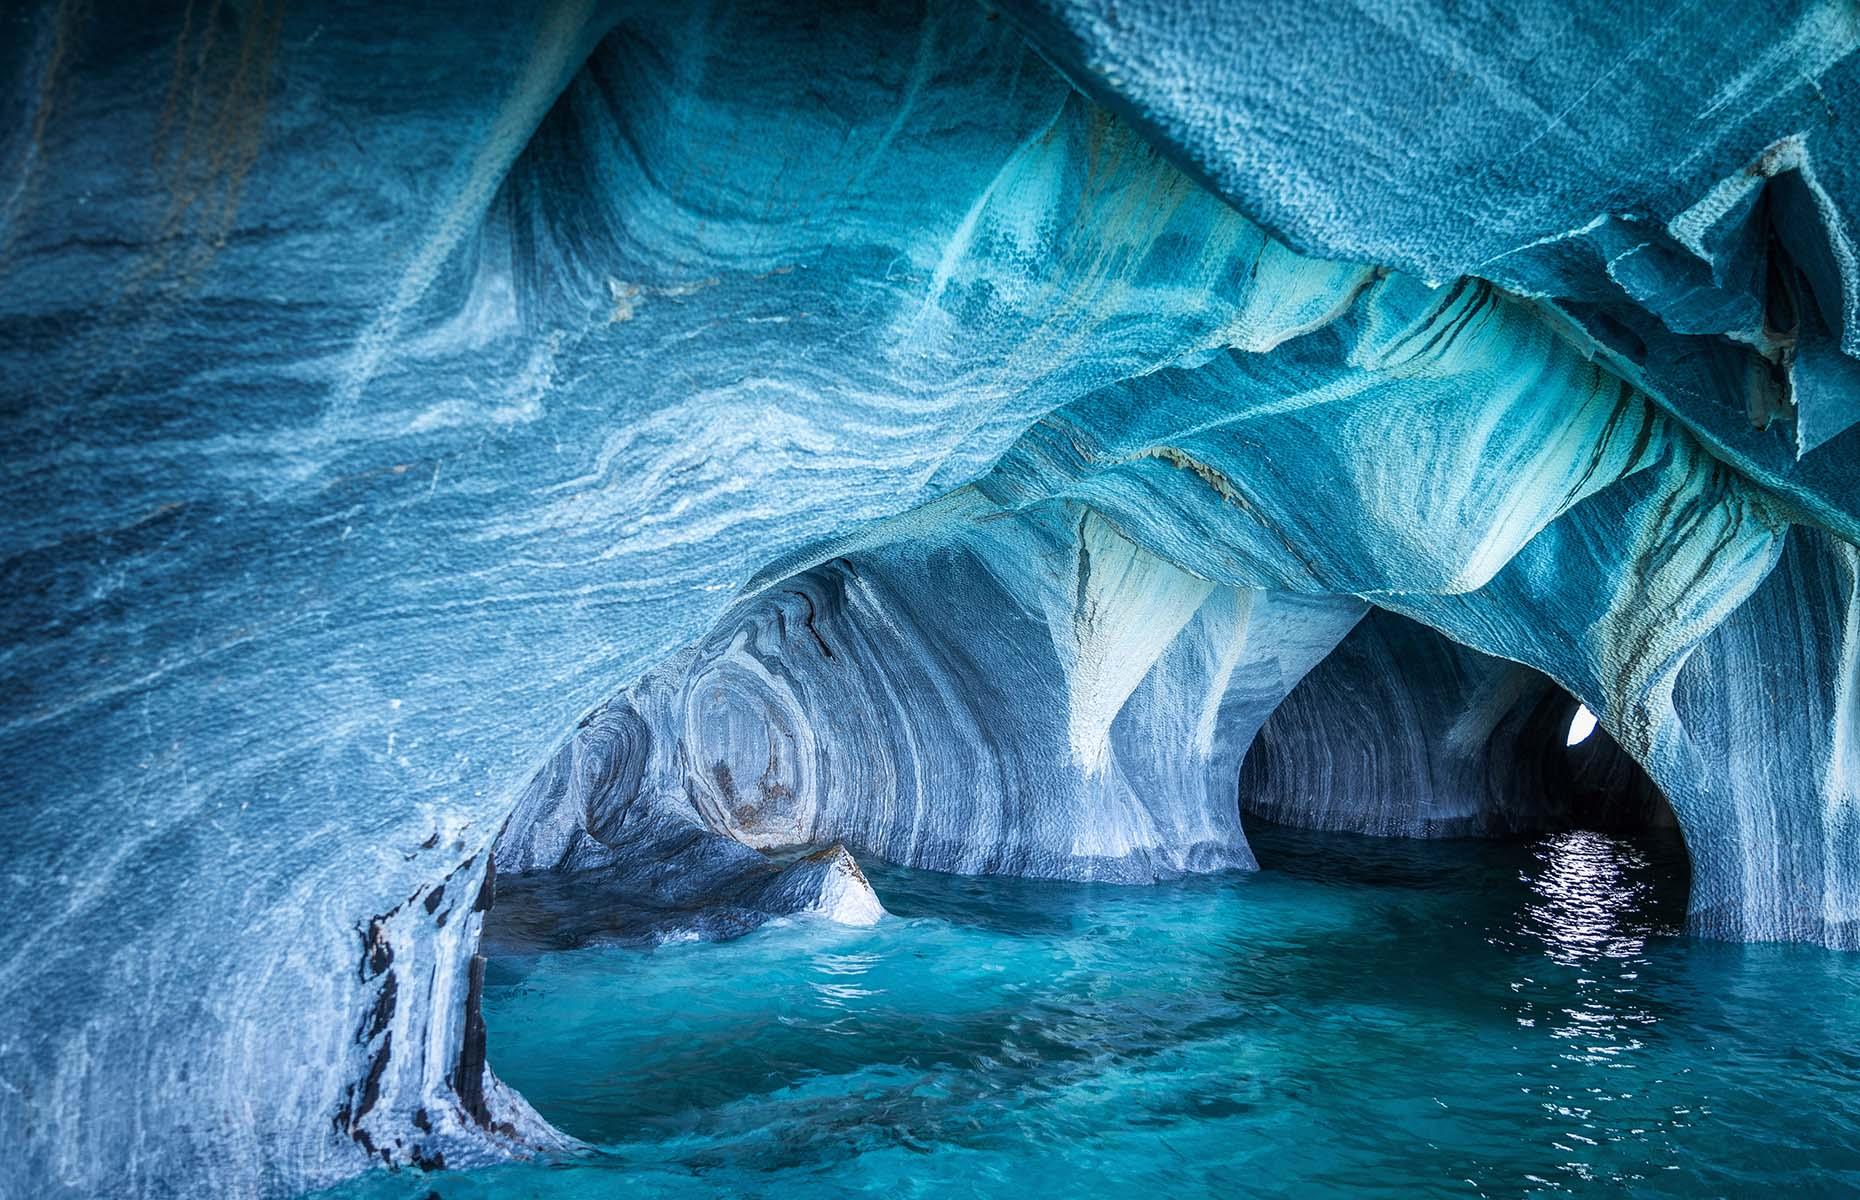 It's easy to see how this remote wonder earned its name. The calcium carbonate caves have been chiselled out by the sea over thousands of years, and the resulting swirls of turquoise, mint and smoky grey look just like marble. Their far-out location on the General Carrera Lake in Patagonia means they've stayed largely untouched and unspoiled.